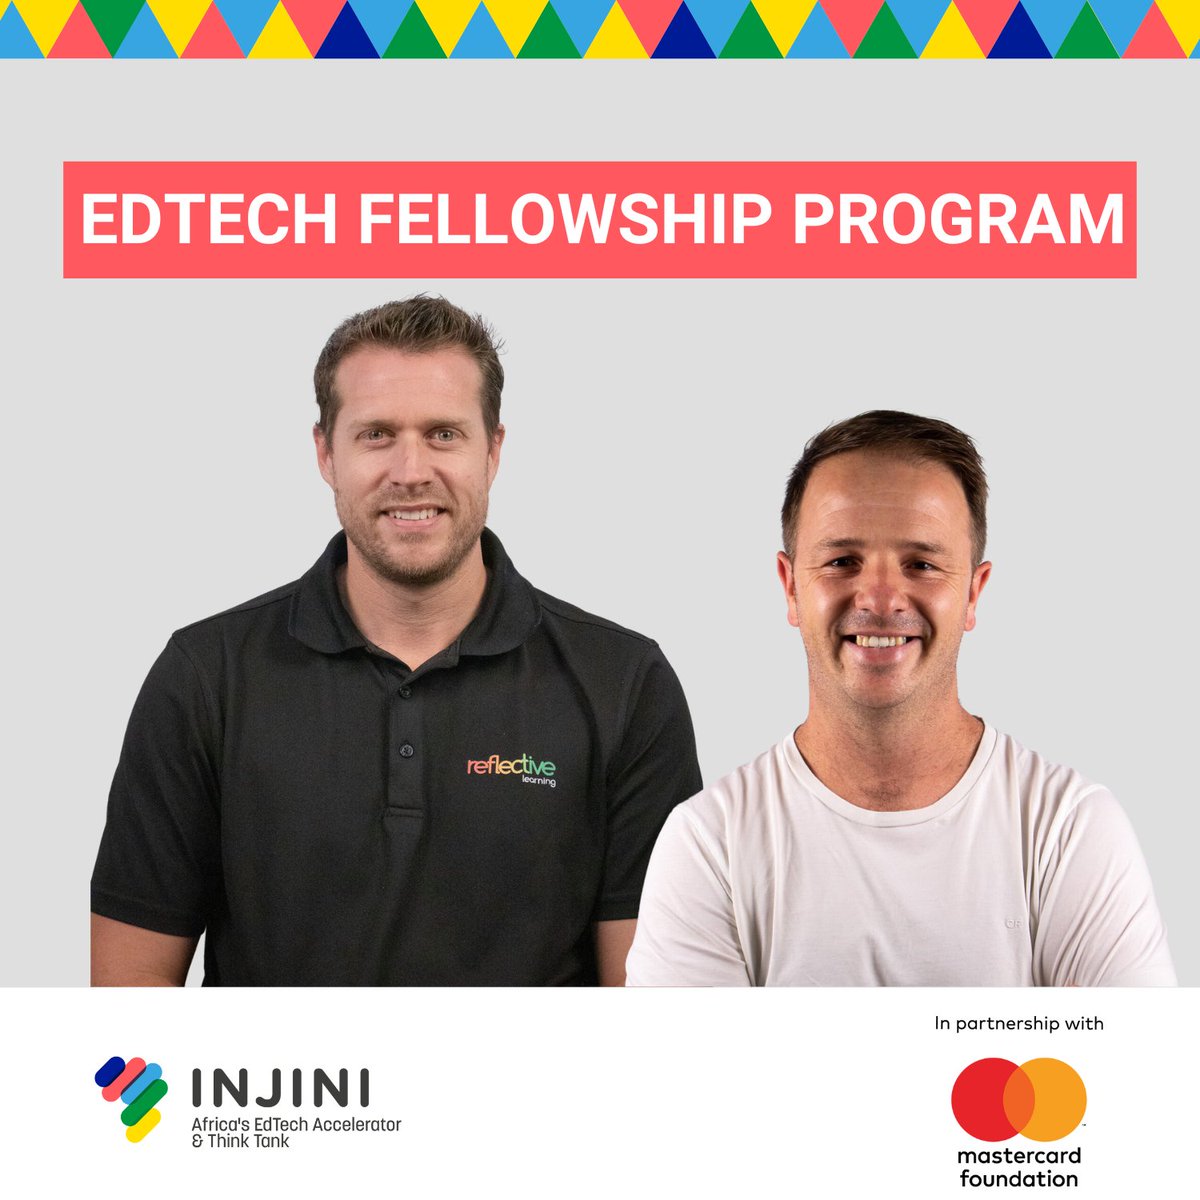 Excited to be part of @injiniedtech’s @MastercardFdn EdTech Fellowship Program. As one of 12 EdTech companies selected, we'll receive funding, coaching, mentoring & training to enhance educational outcomes in South Africa. #YoungAfricaWorks #EdTechFellowshipProgram